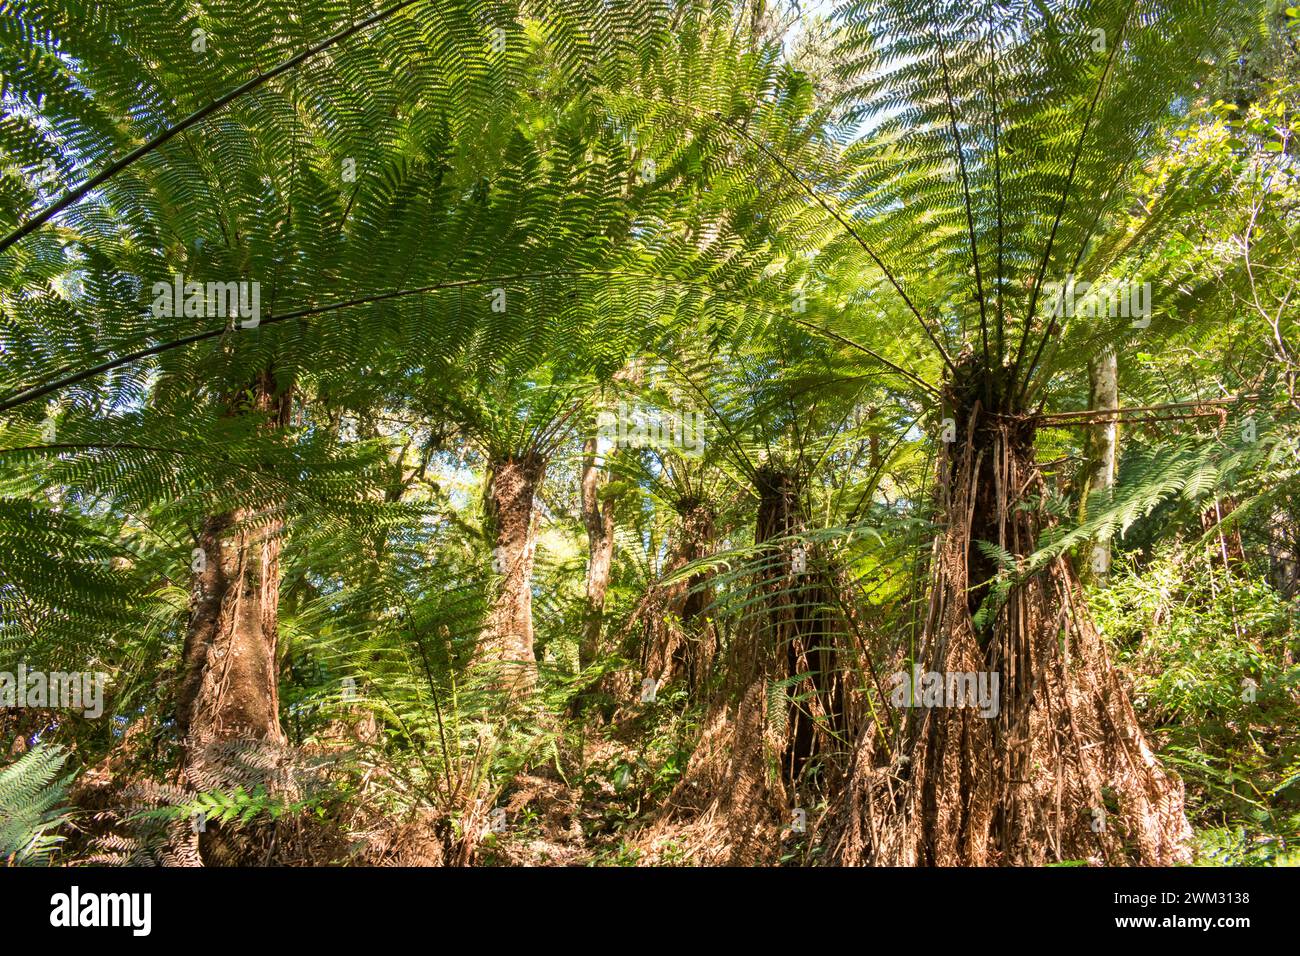 Native forest with many Dicksonia sellowiana (Xaxim), an endangered arborescent fern at the Ronda Natural Park in Sao Francisco de Paula (Brazil) Stock Photo